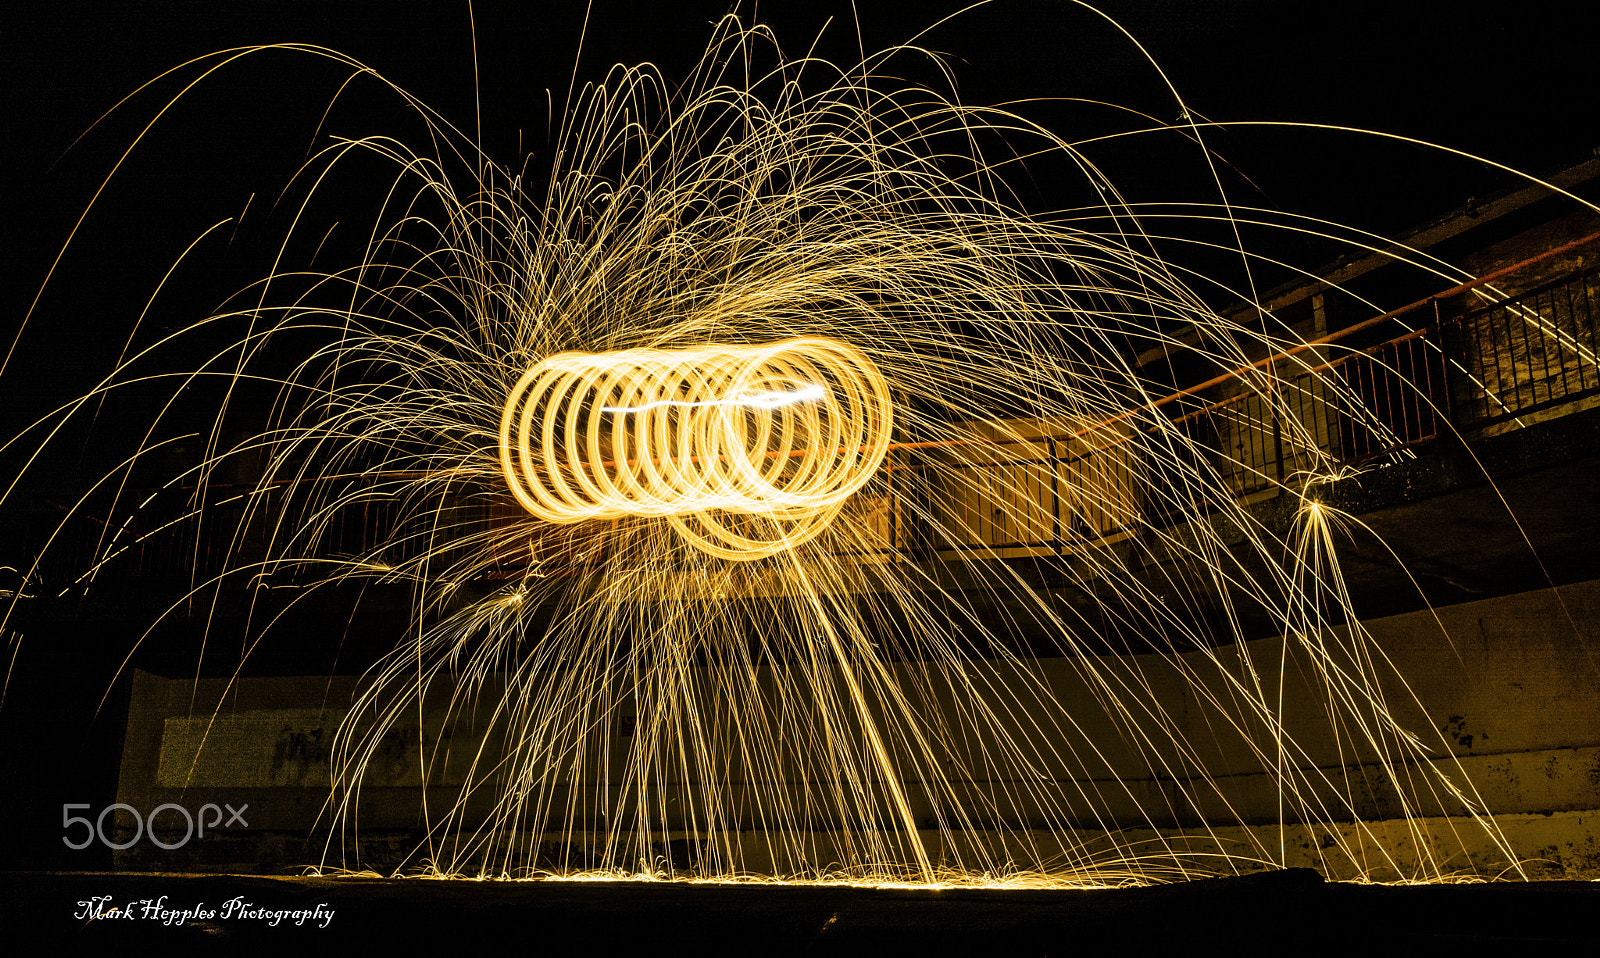 Nikon D7200 sample photo. Wirewool spinning photography